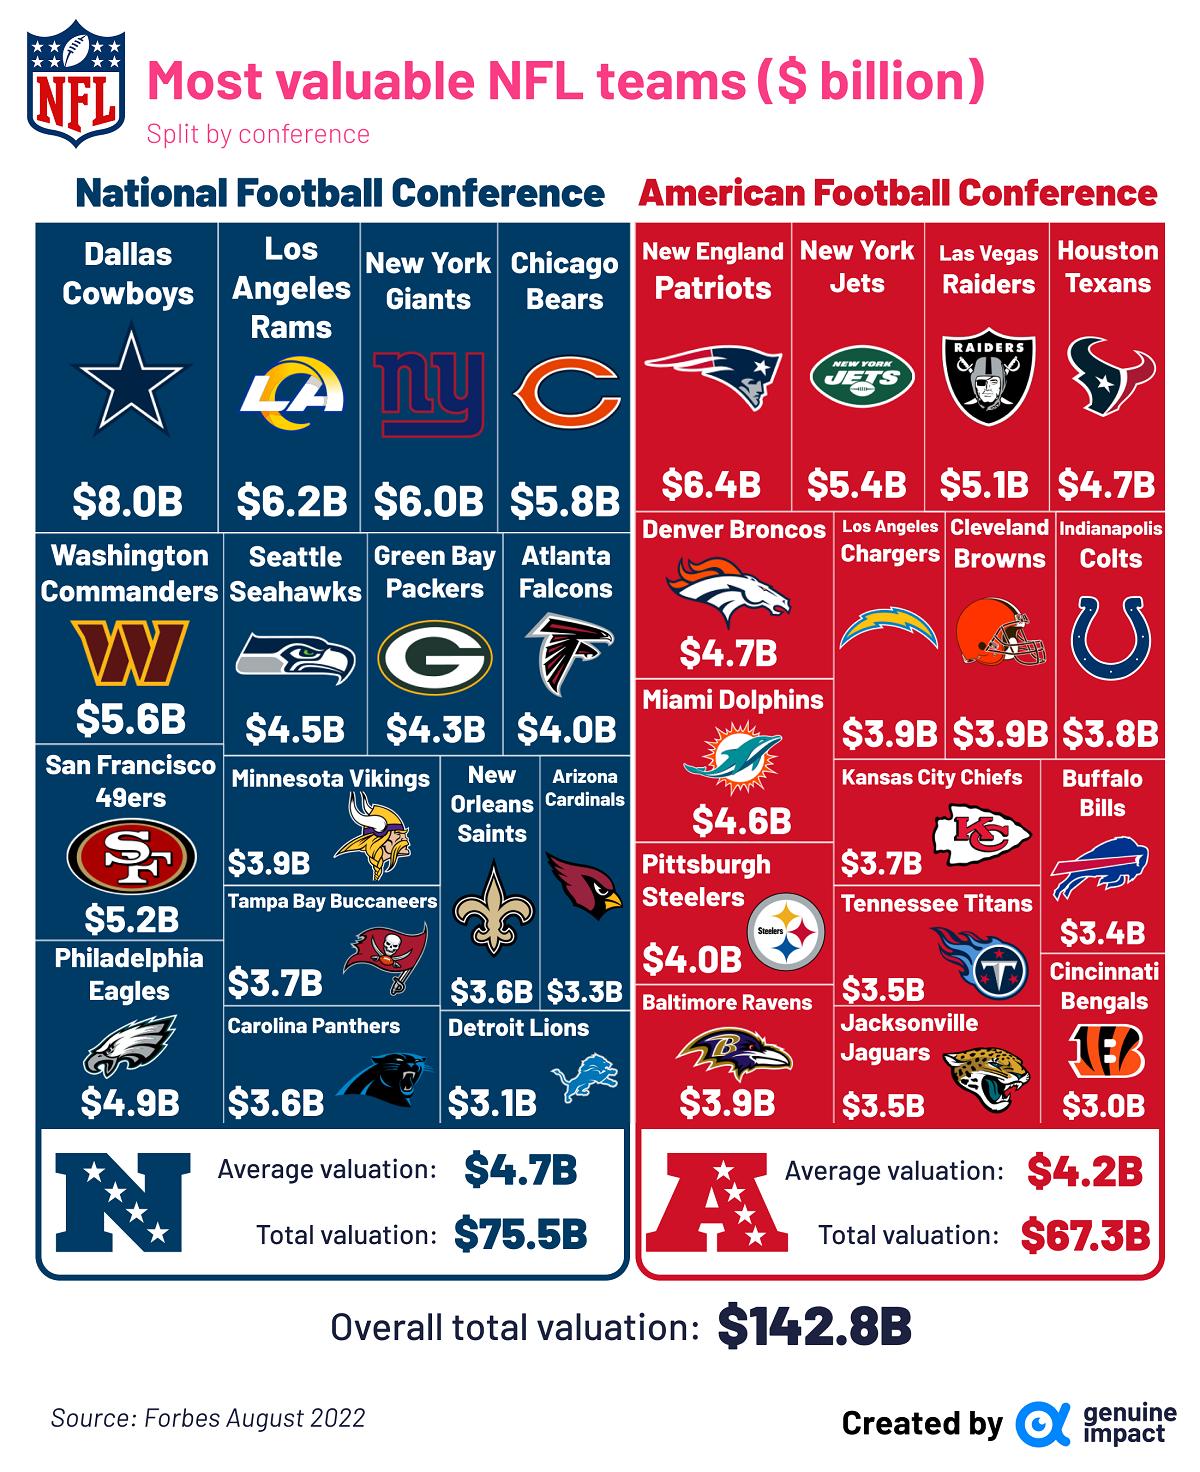 visualizing the most valuable NFL teams by conference